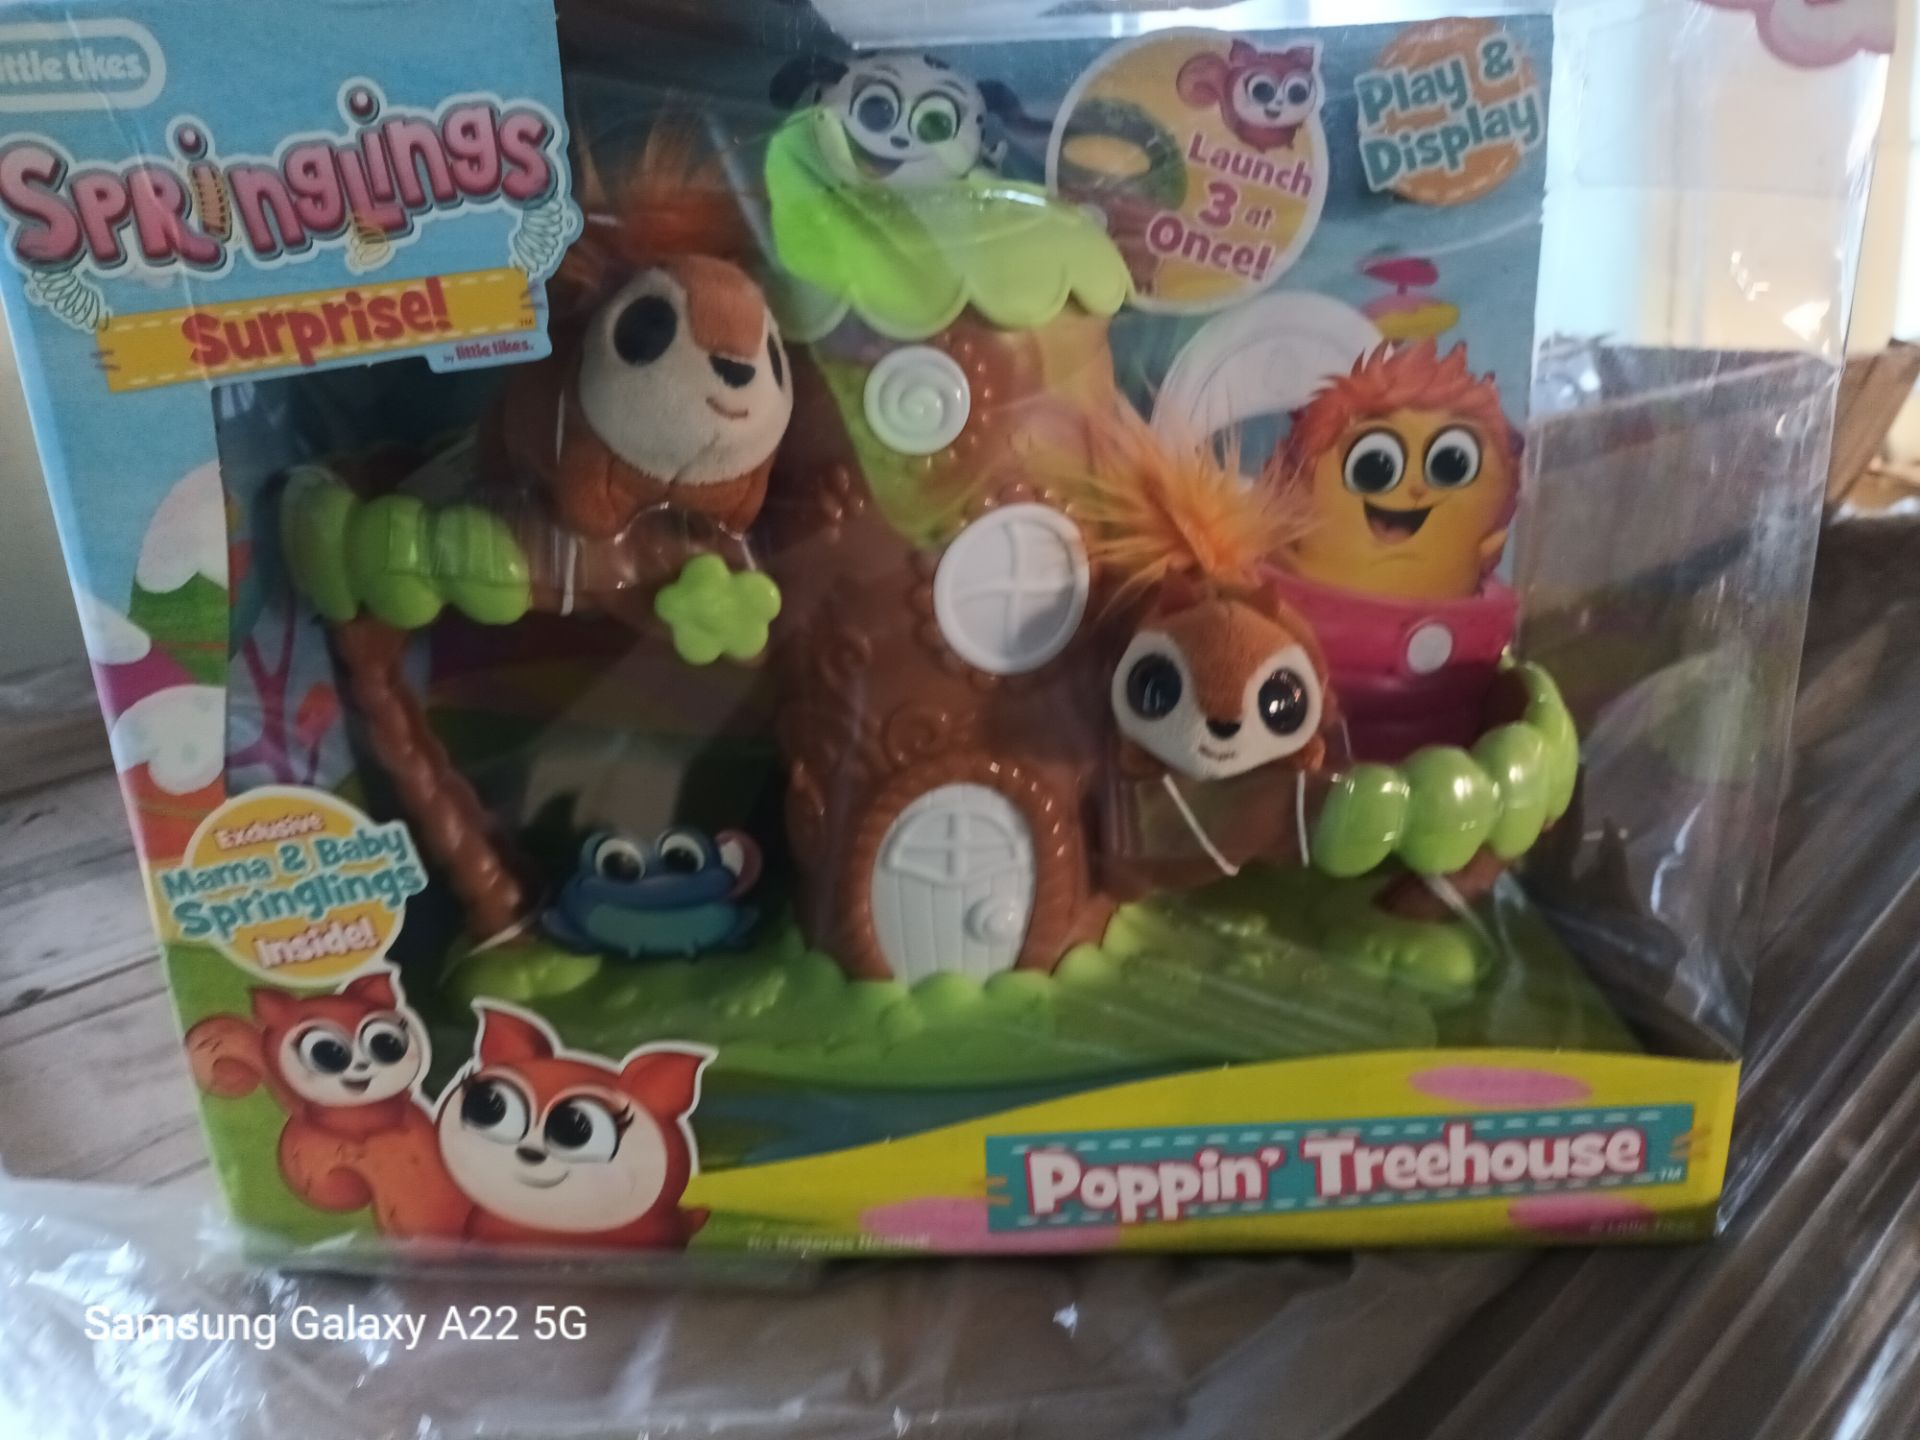 PALLET OF 60 X SPRINGLINGS SUPRISE POPPING TREEHOUSE - Image 2 of 3